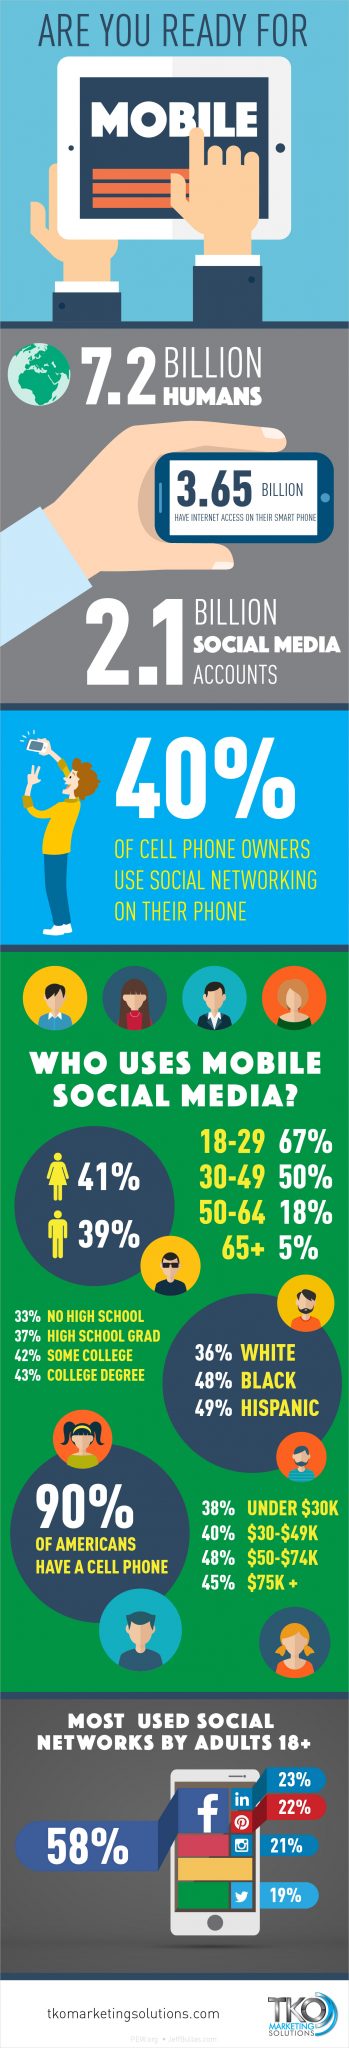 are-you-ready-for-mobile-infographic-by-TKO-Graphix